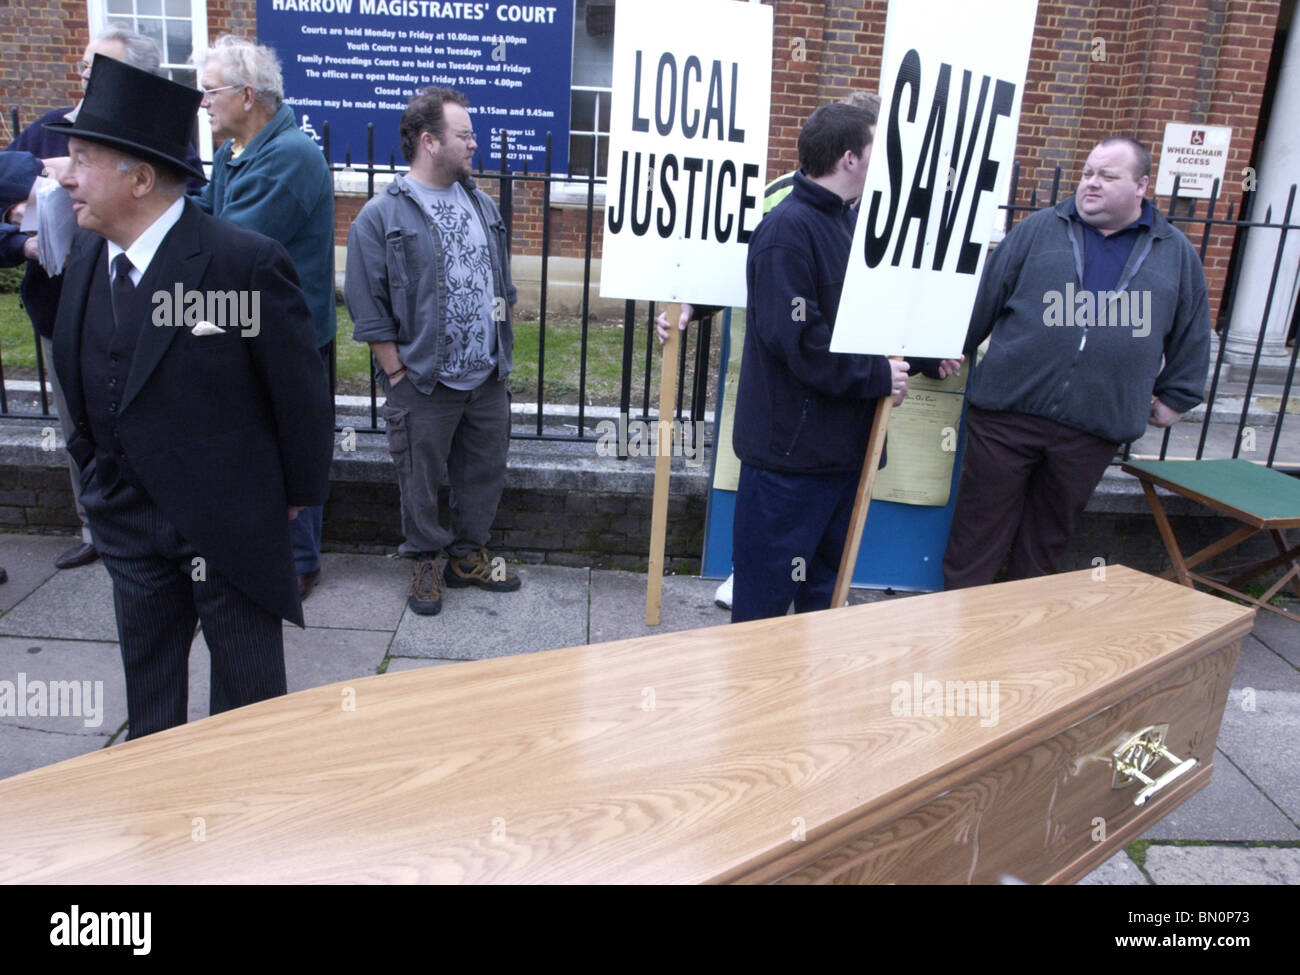 Harrow Magistrates Court the death of local justice demo Stock Photo